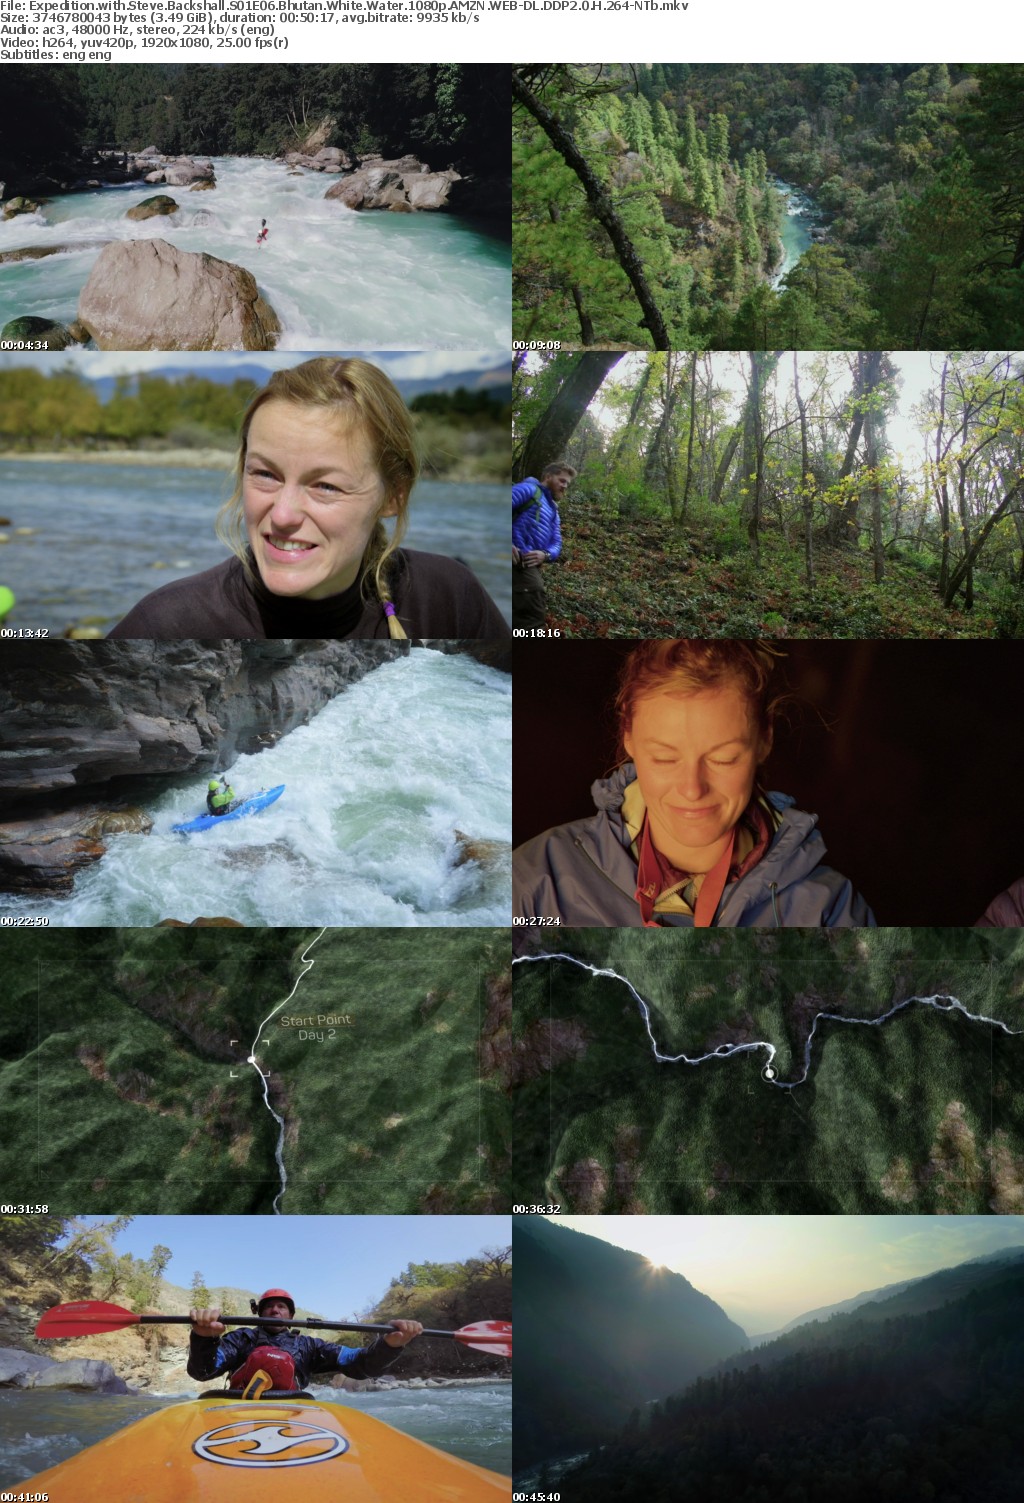 Expedition with Steve Backshall S01E06 Bhutan White Water 1080p AMZN WEB-DL DDP2 0 H 264-NTb